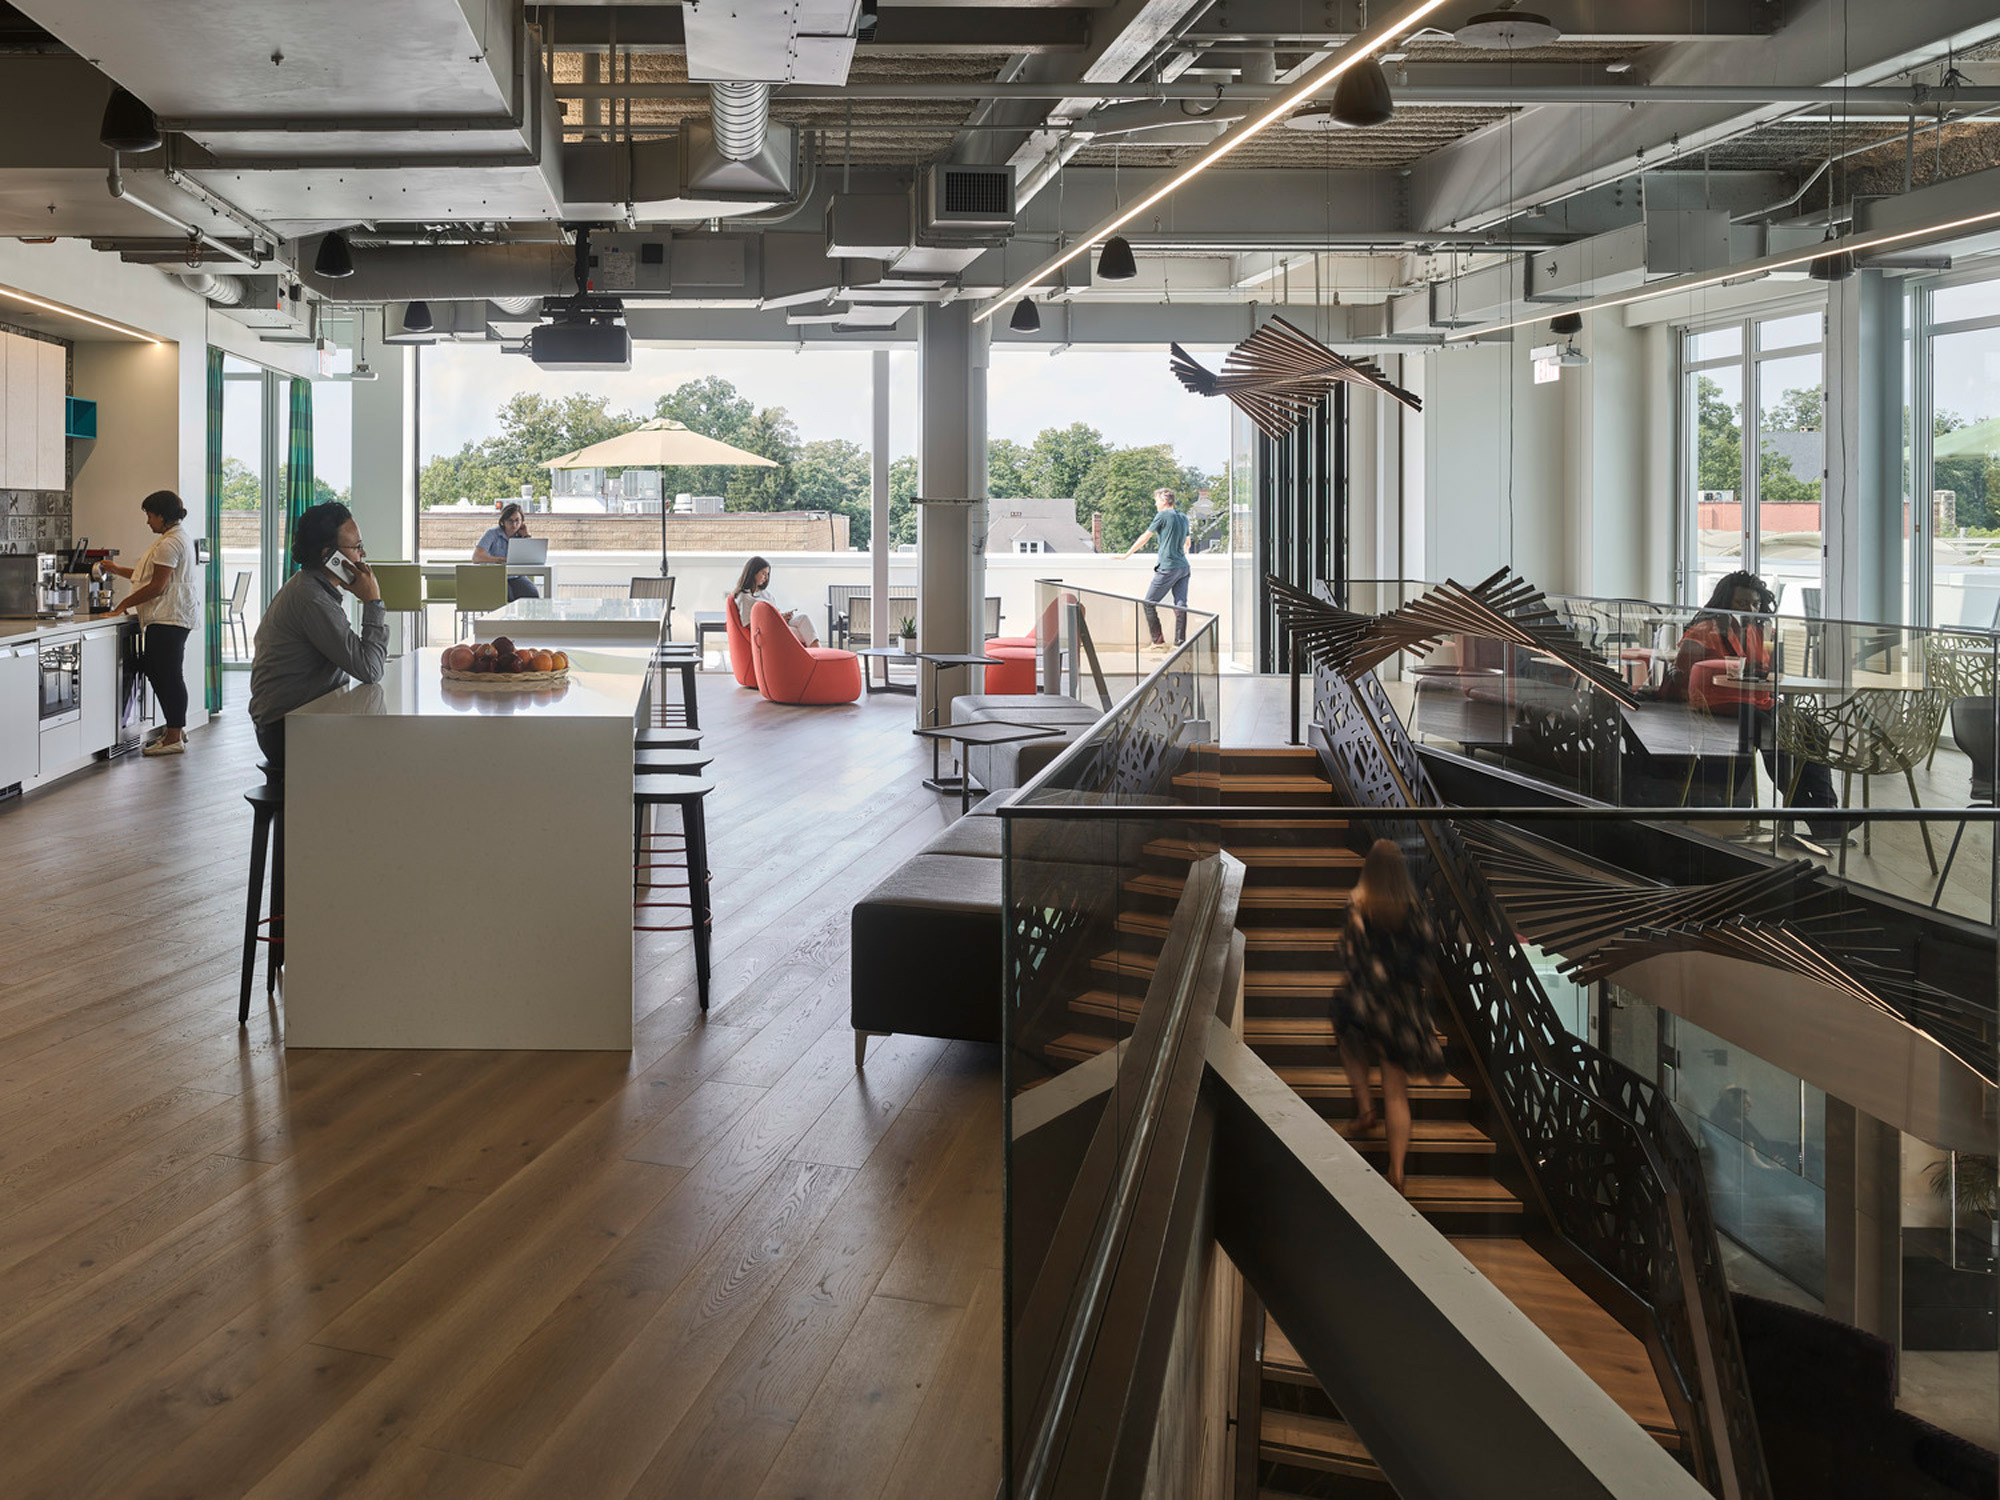 Open-plan office space with modern design, featuring exposed ceiling ductwork, polished concrete flooring, and contemporary furniture. A kitchenette with bar seating takes foreground while employees engage in various activities within natural light-filled surroundings. Unique wooden partition sculptures provide visual interest and spatial division.